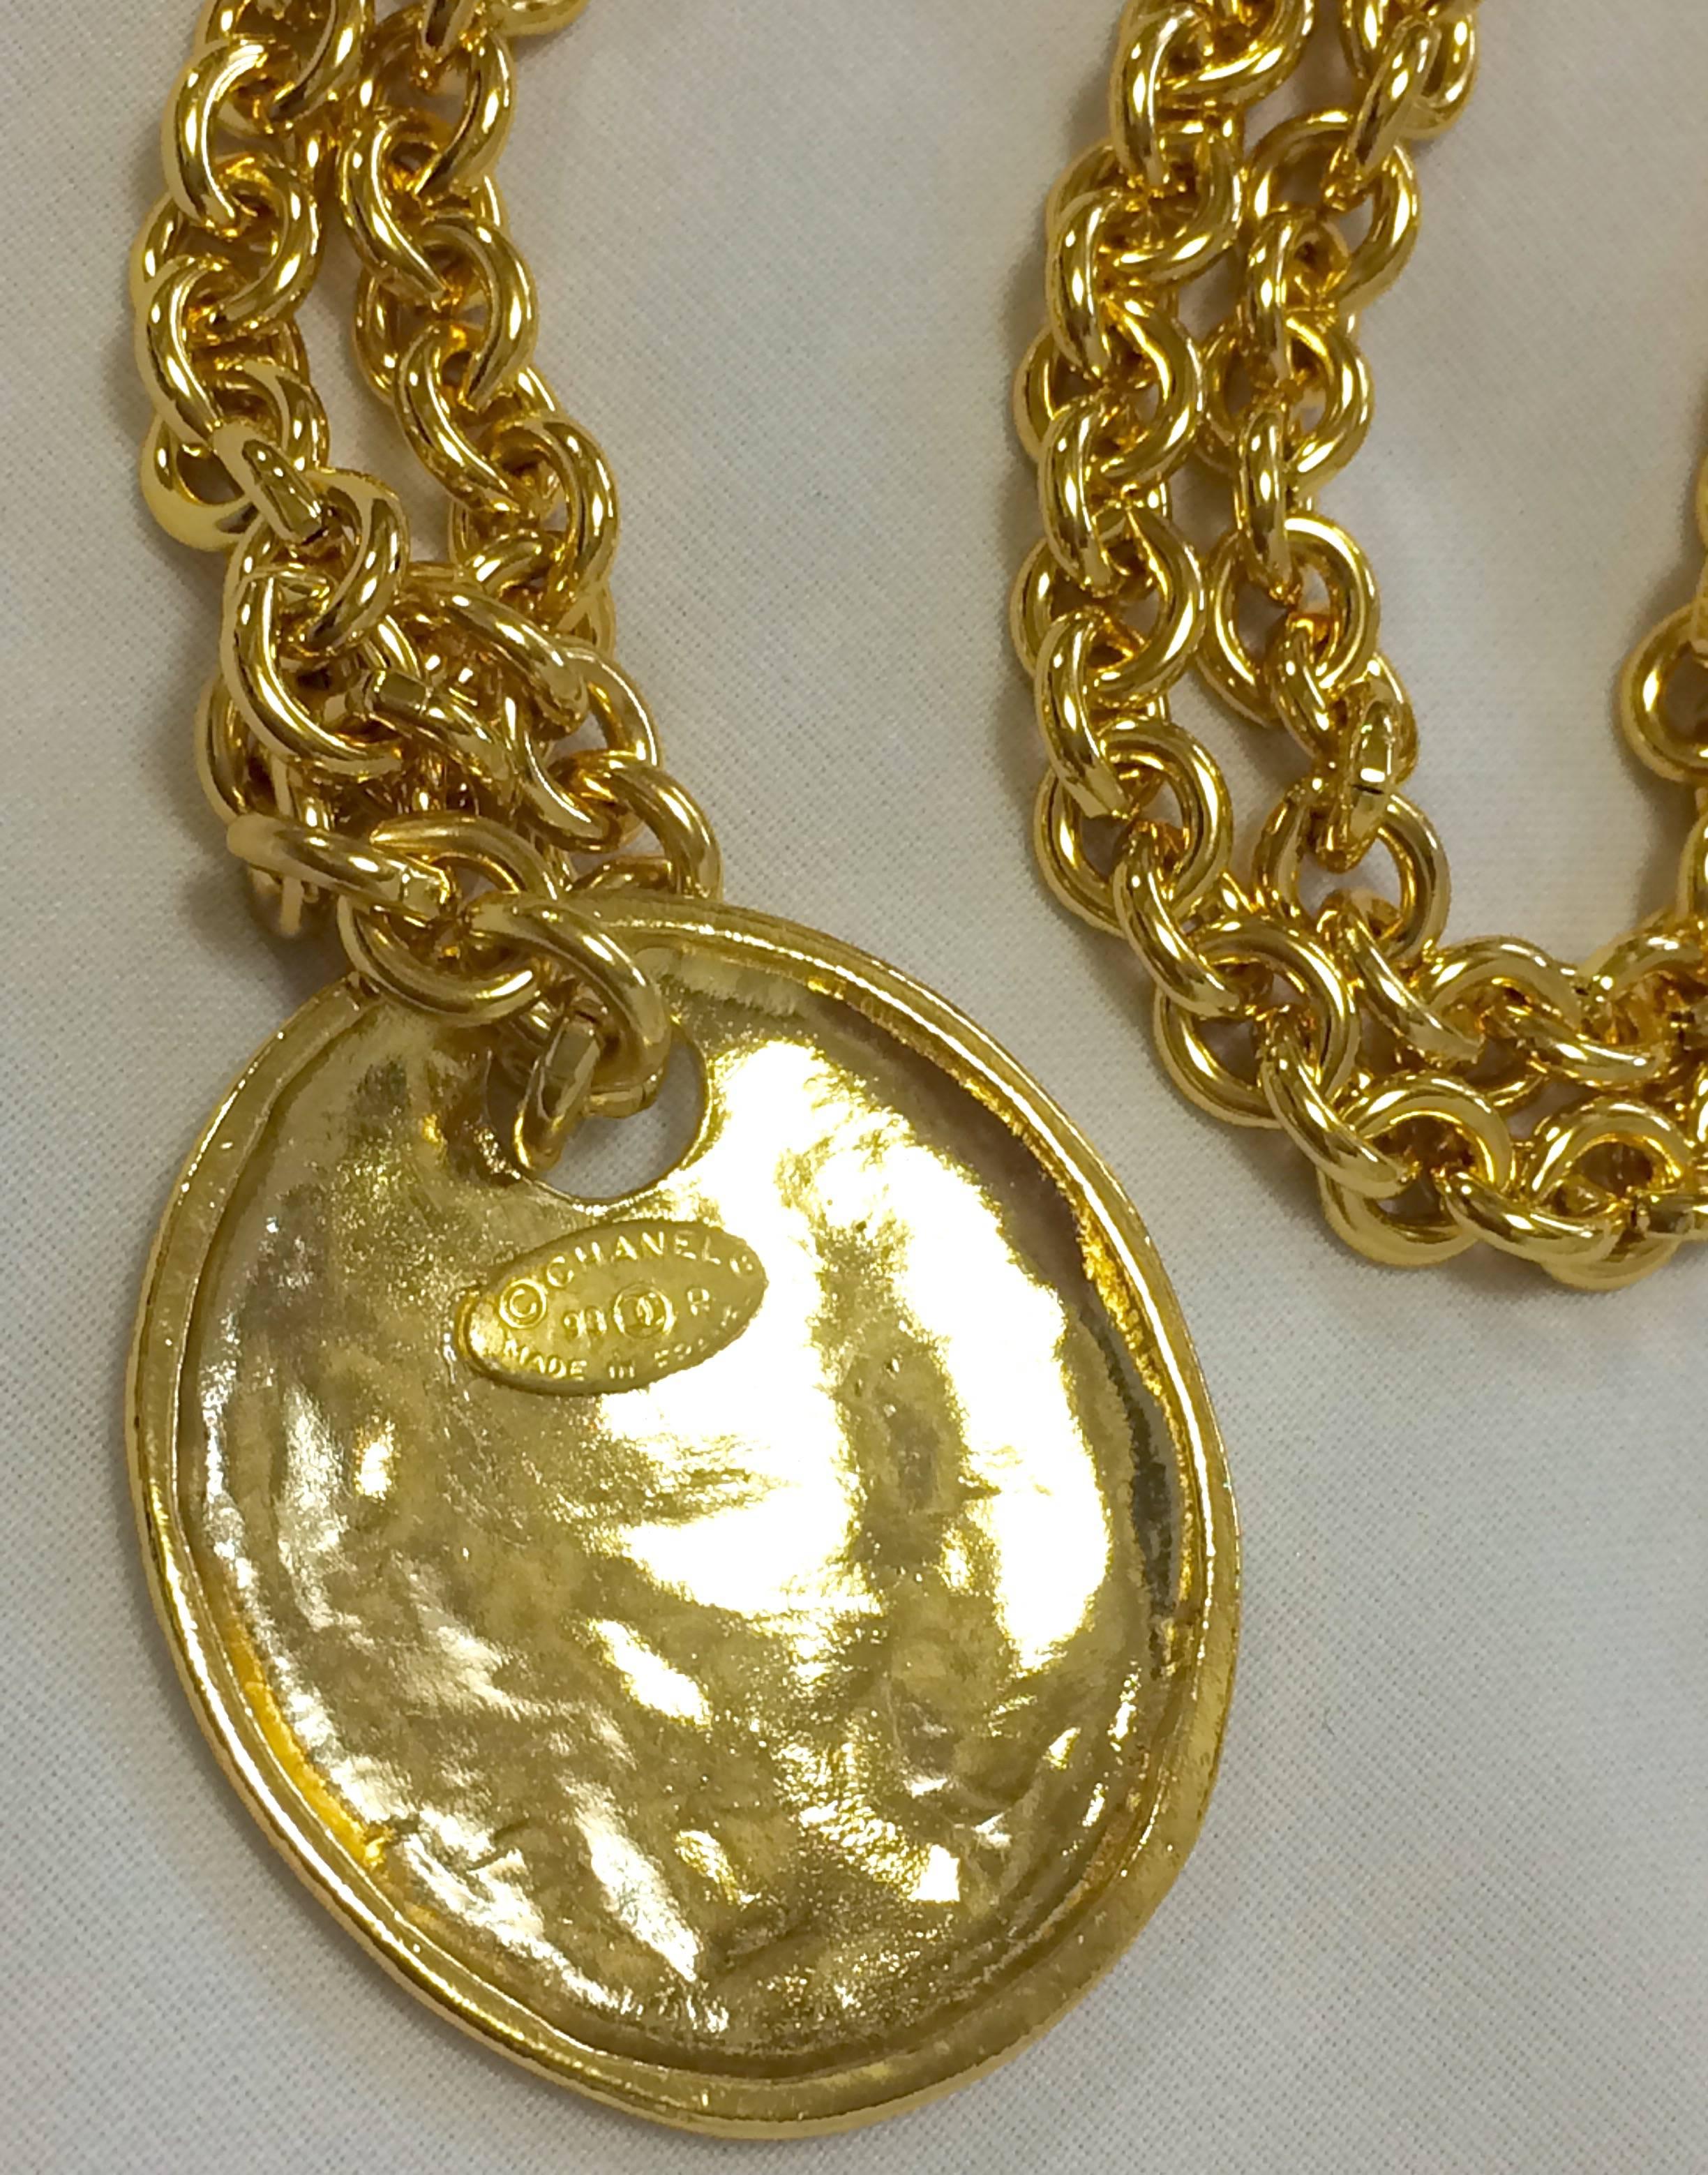 MINT. Vintage CHANEL golden long chain necklace with round coin, medal shape top 1